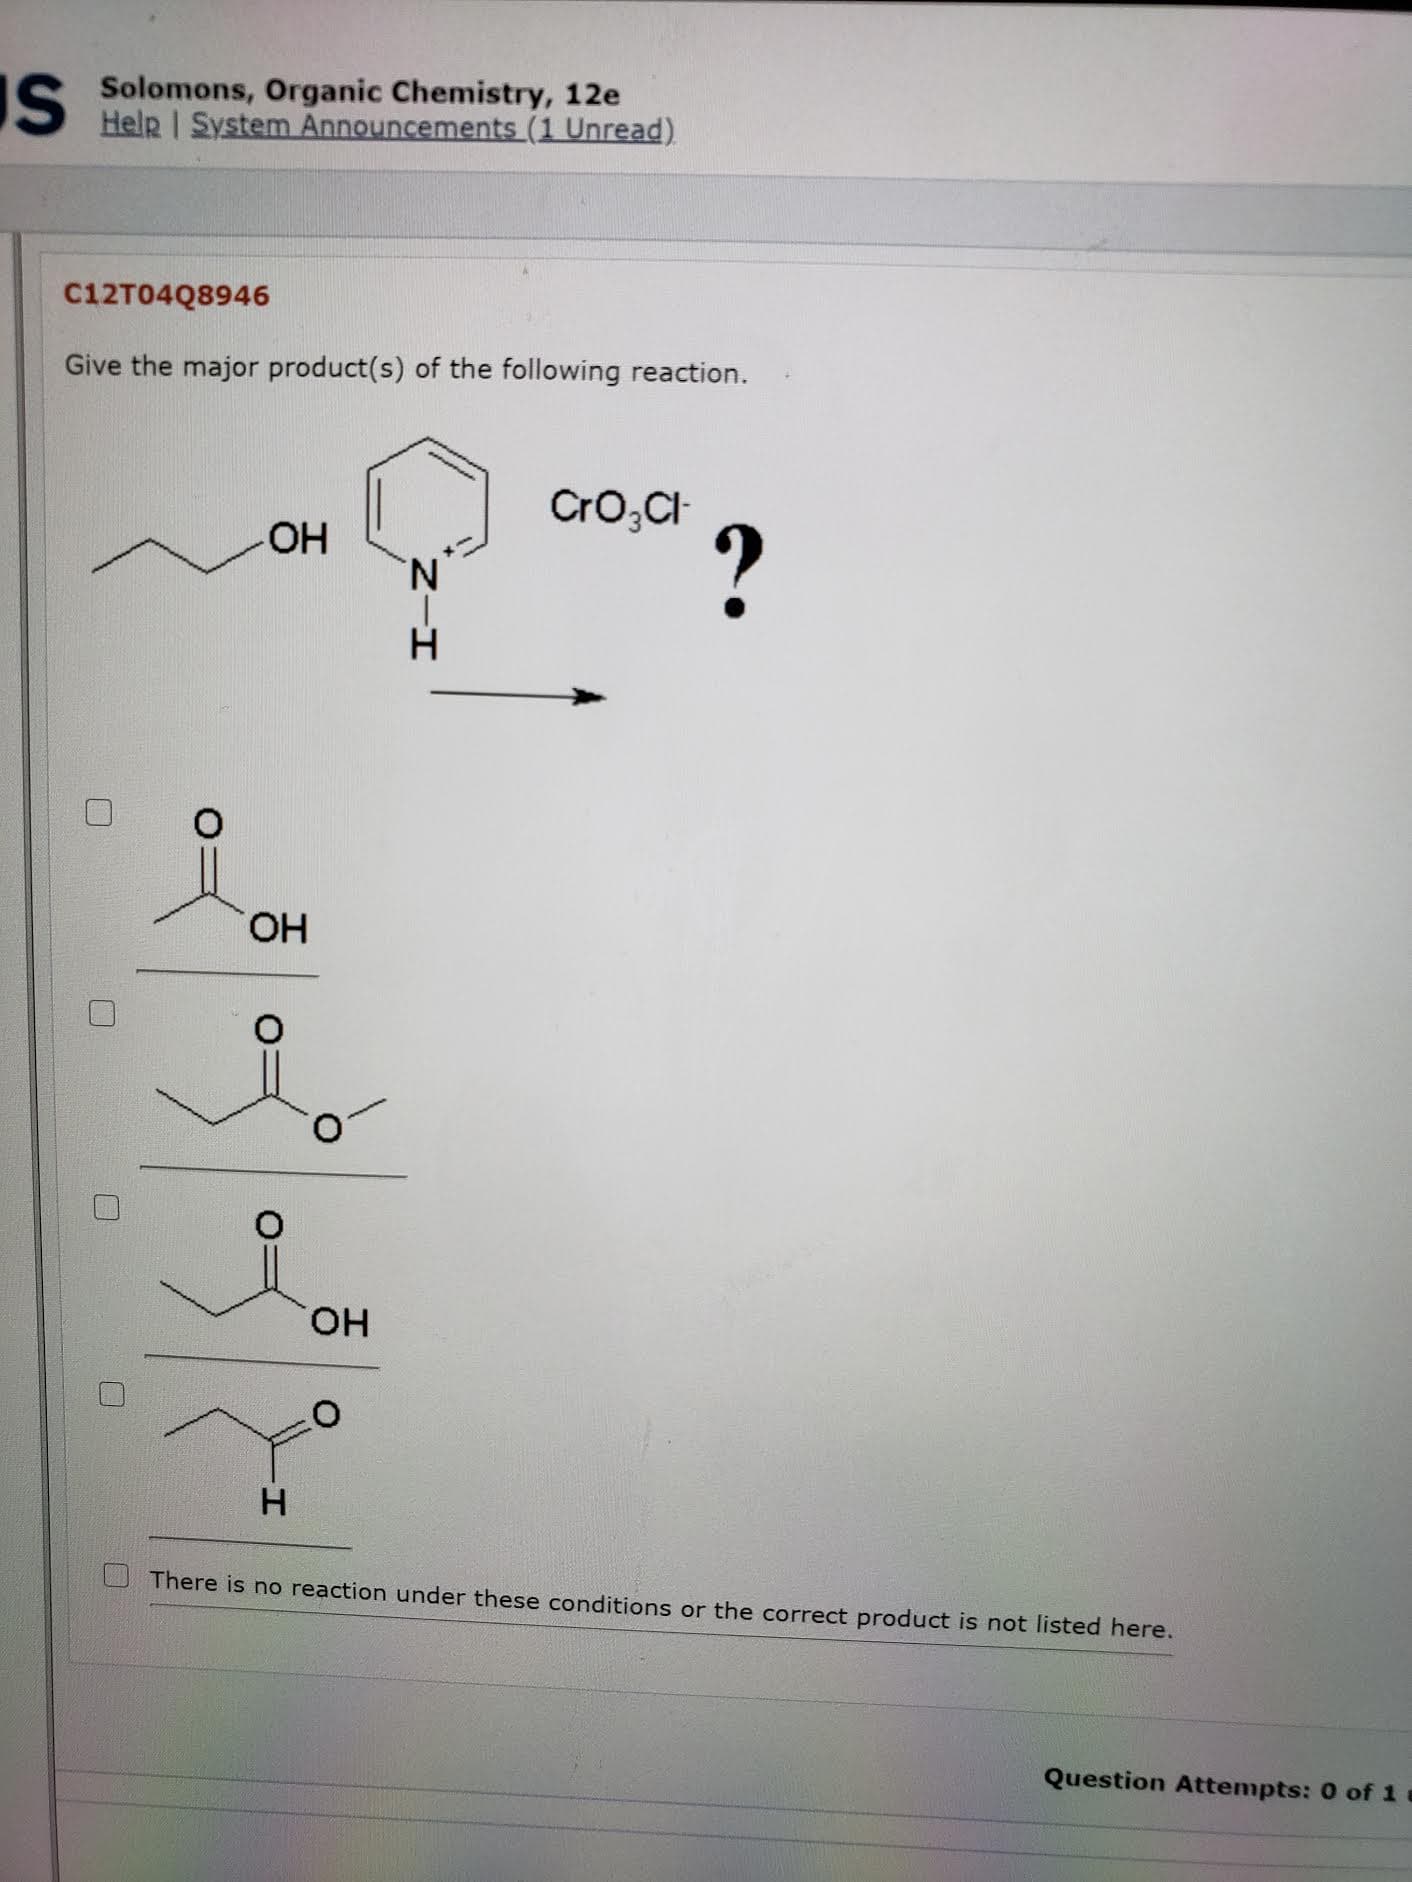 Give the major product(s) of the following reaction.
Cro;CH
OH
N.
